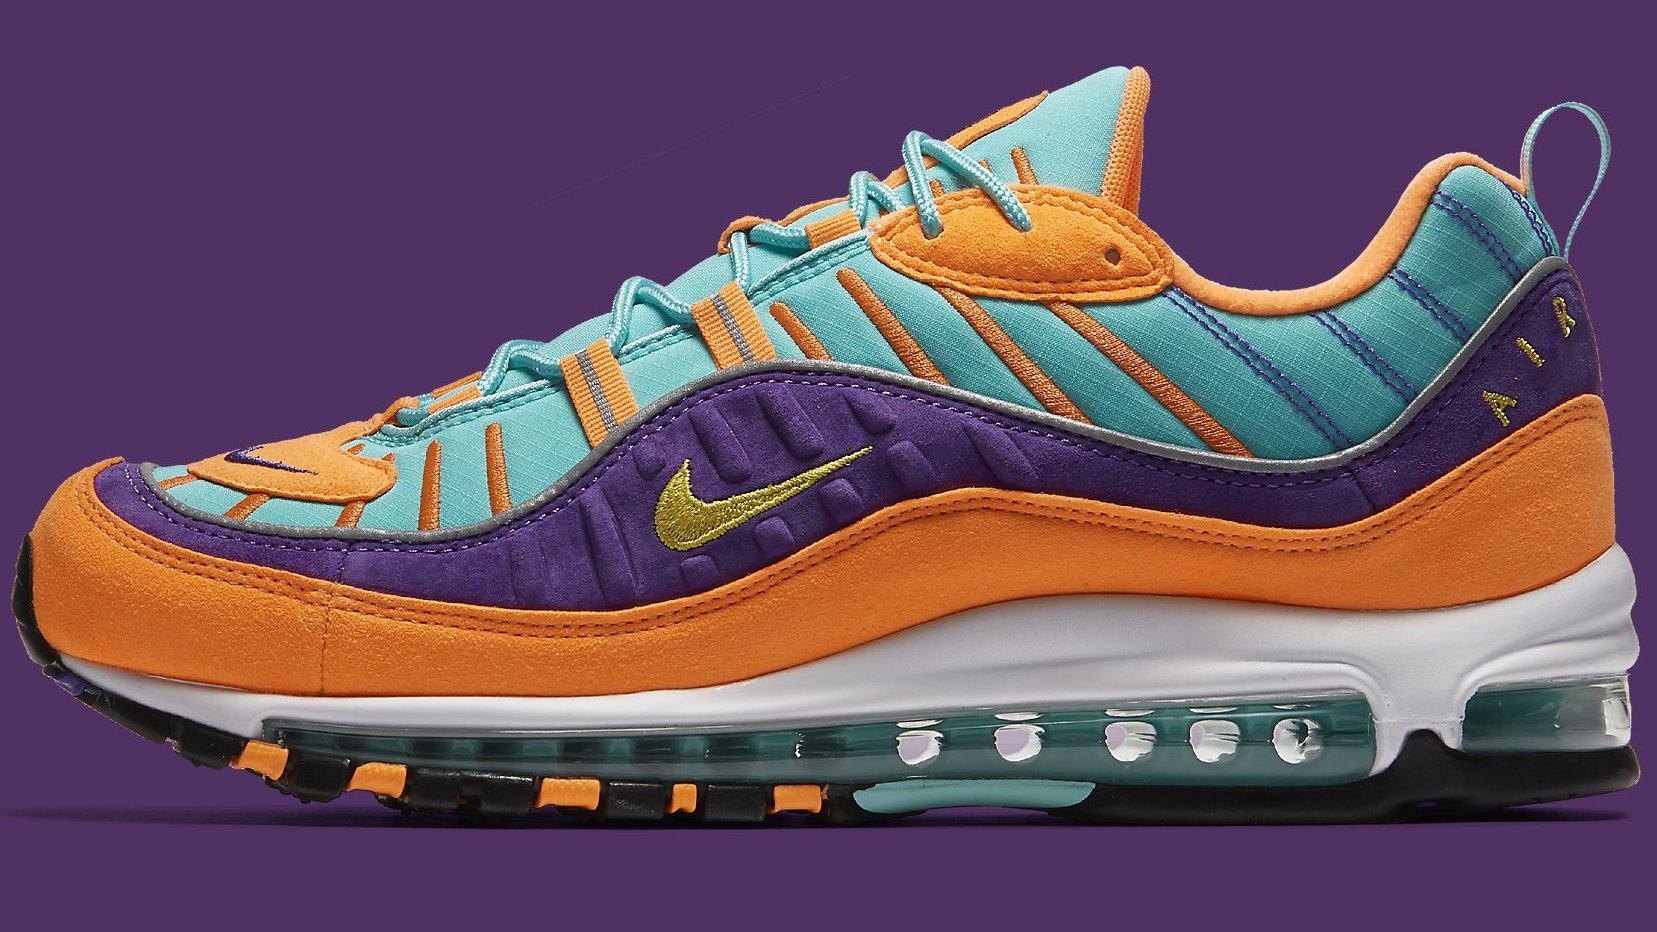 Nike AIr Max 98 | Sole Collector